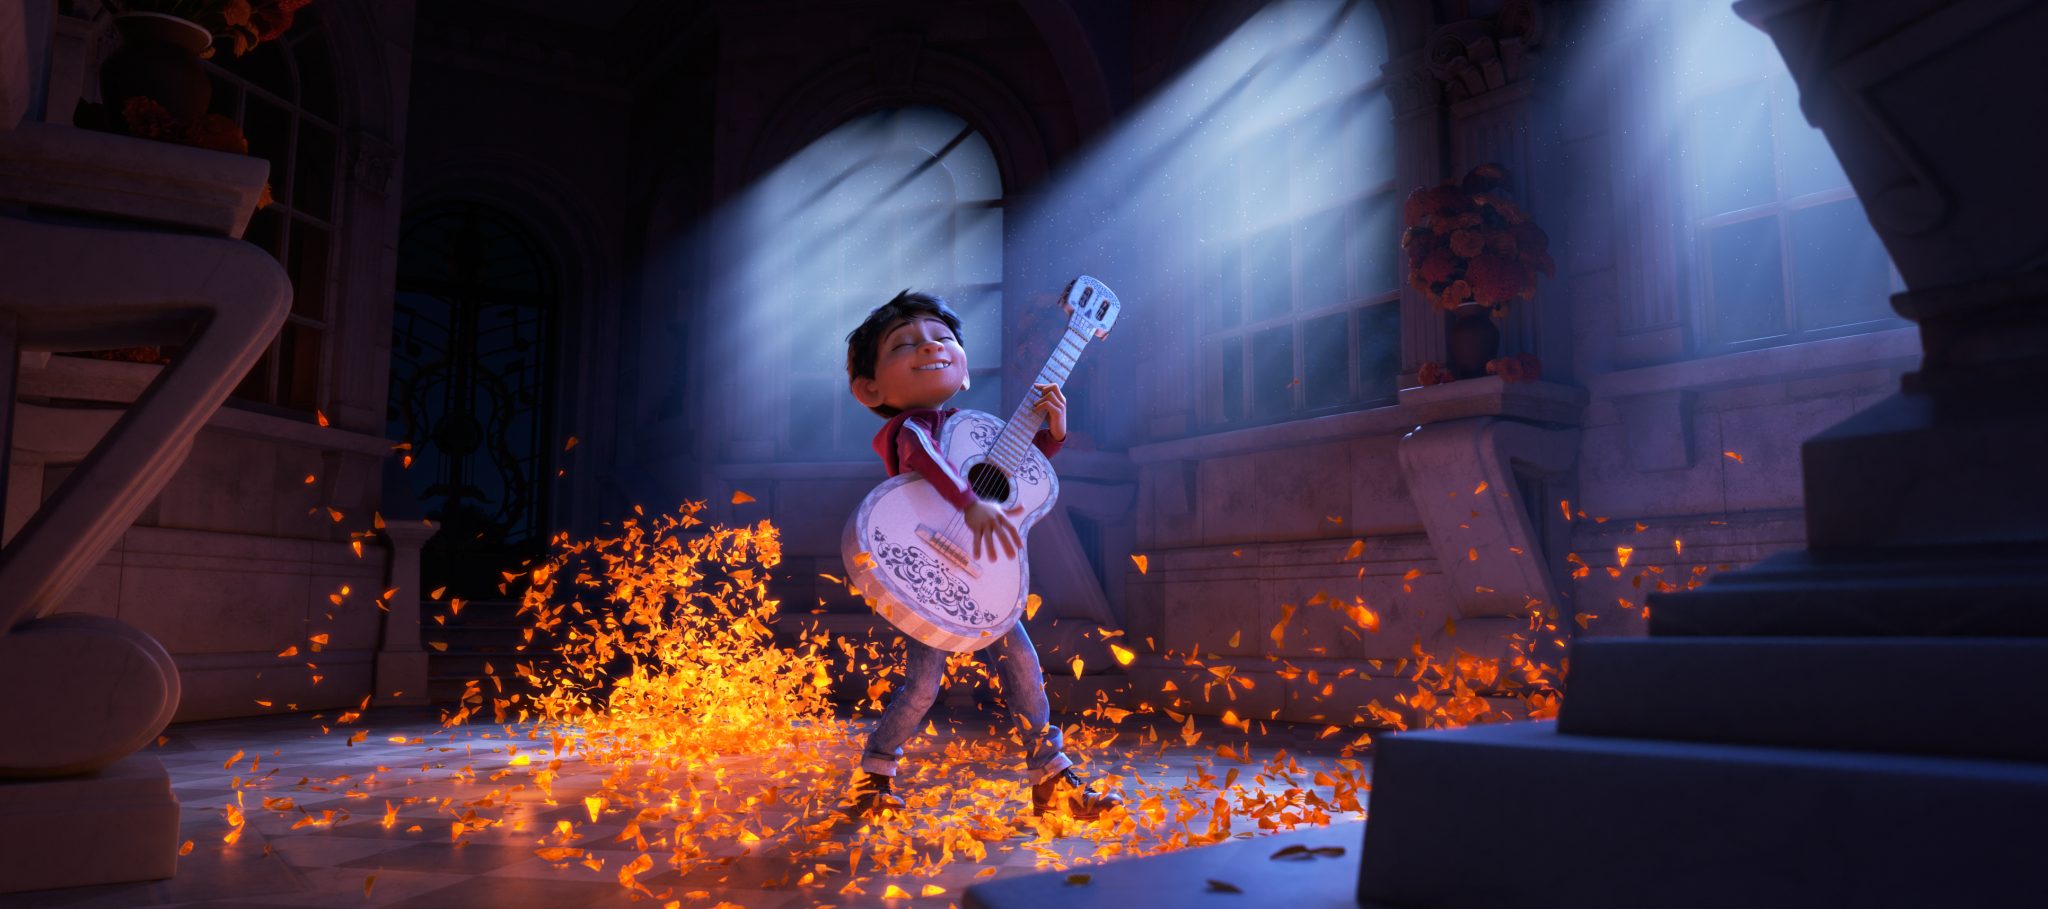 Meet the Extended Family from Disney-Pixar’s Coco!